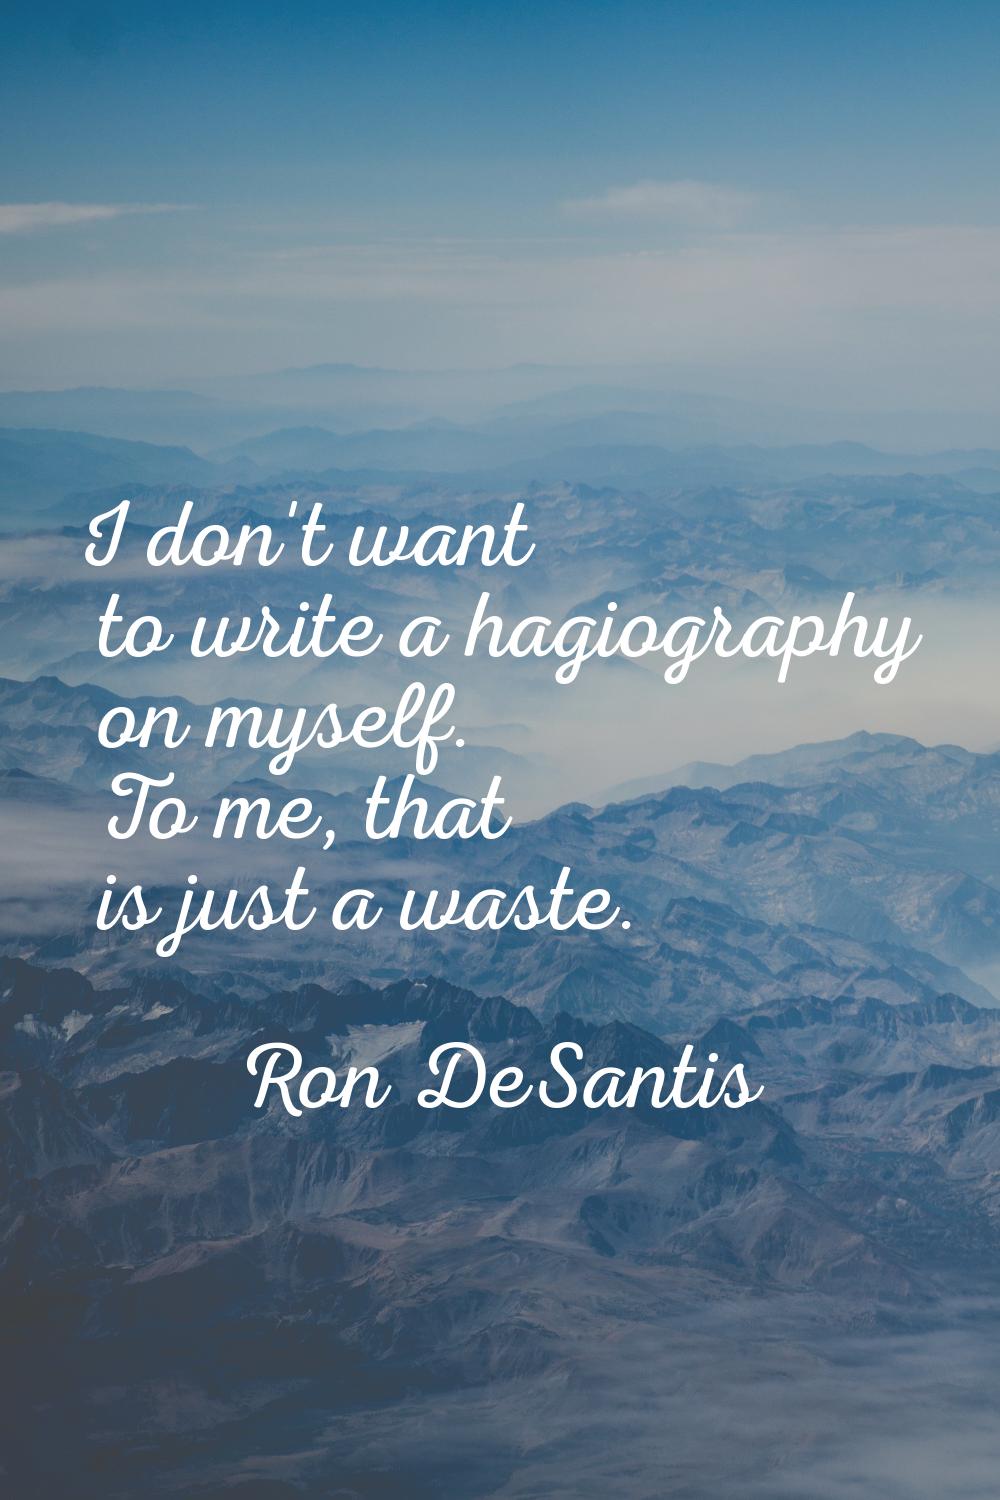 I don't want to write a hagiography on myself. To me, that is just a waste.